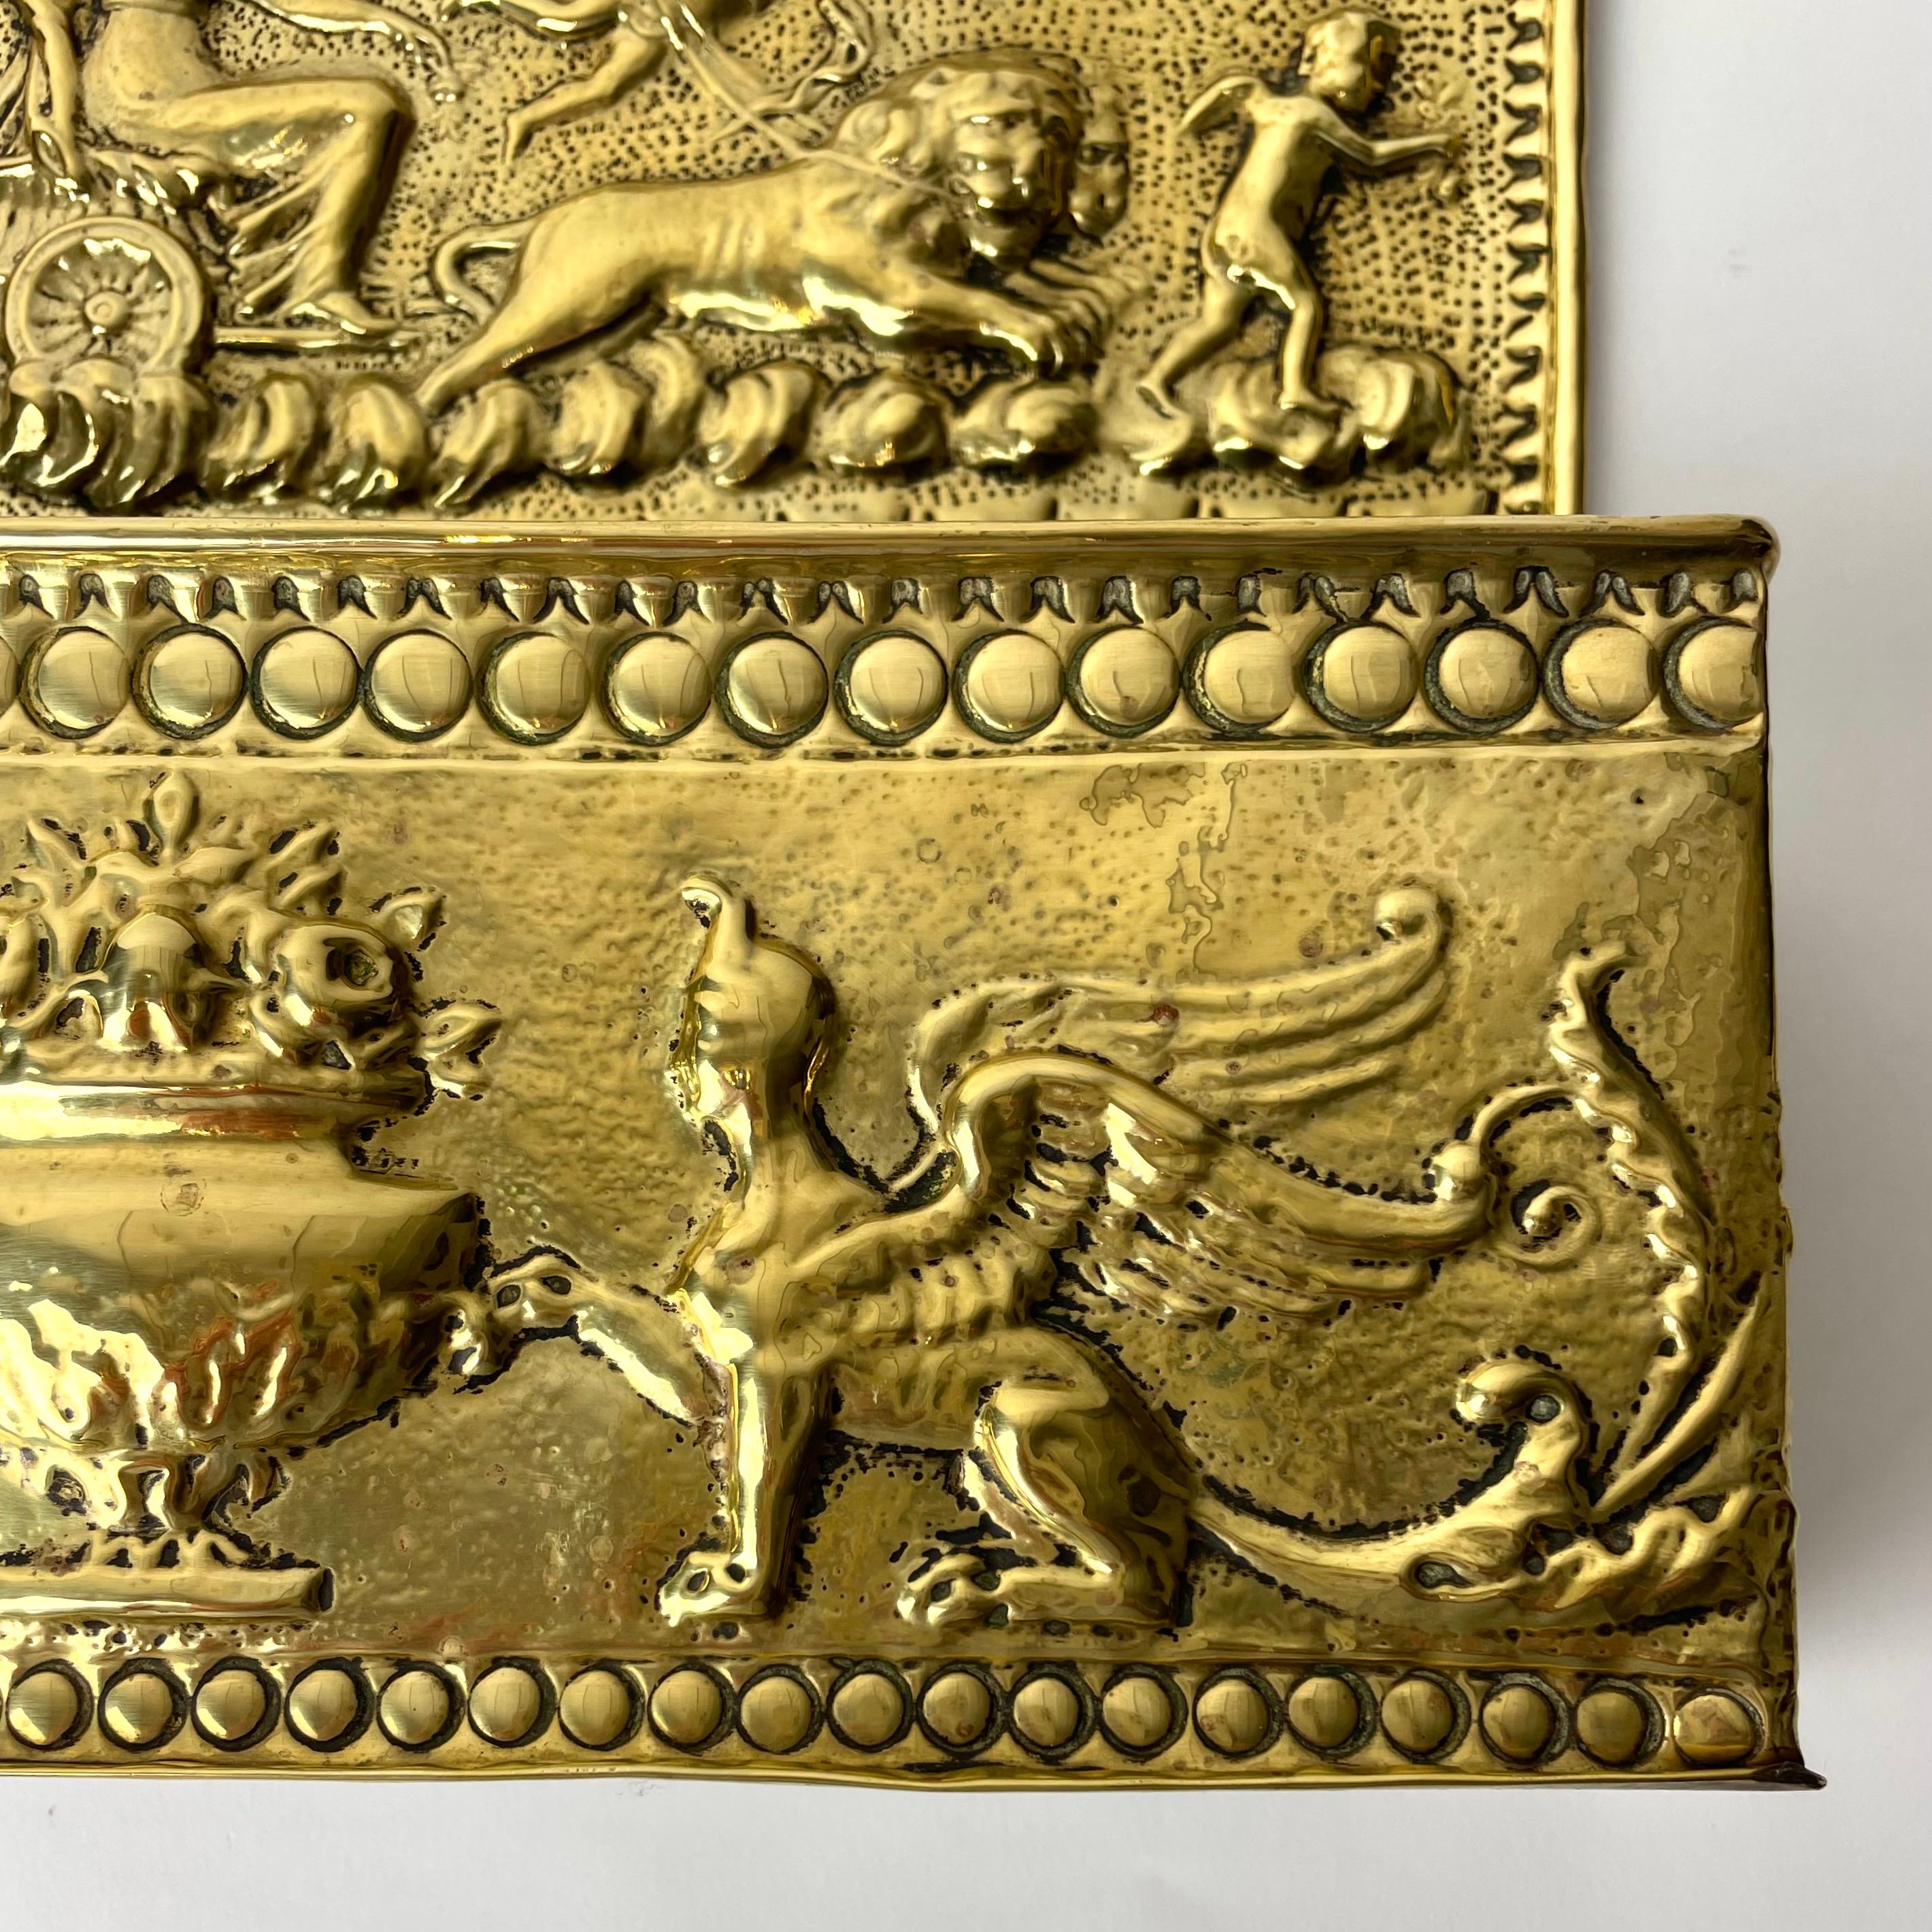 European Brass Wall Utensil Holder, Empire, Early 19th C, with Roman Goddess with Putti For Sale